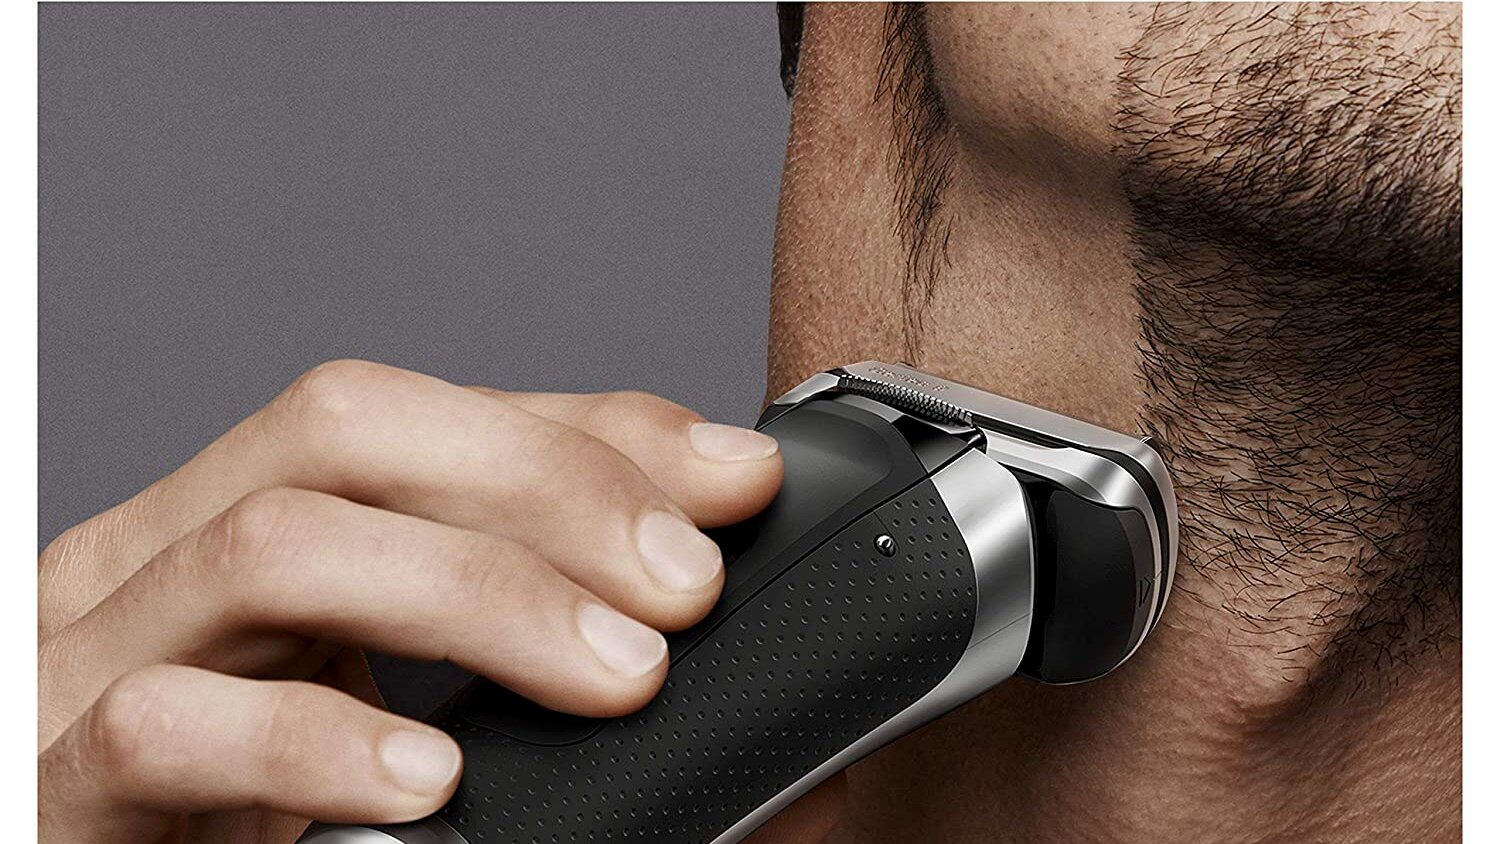 Best Electric Shavers